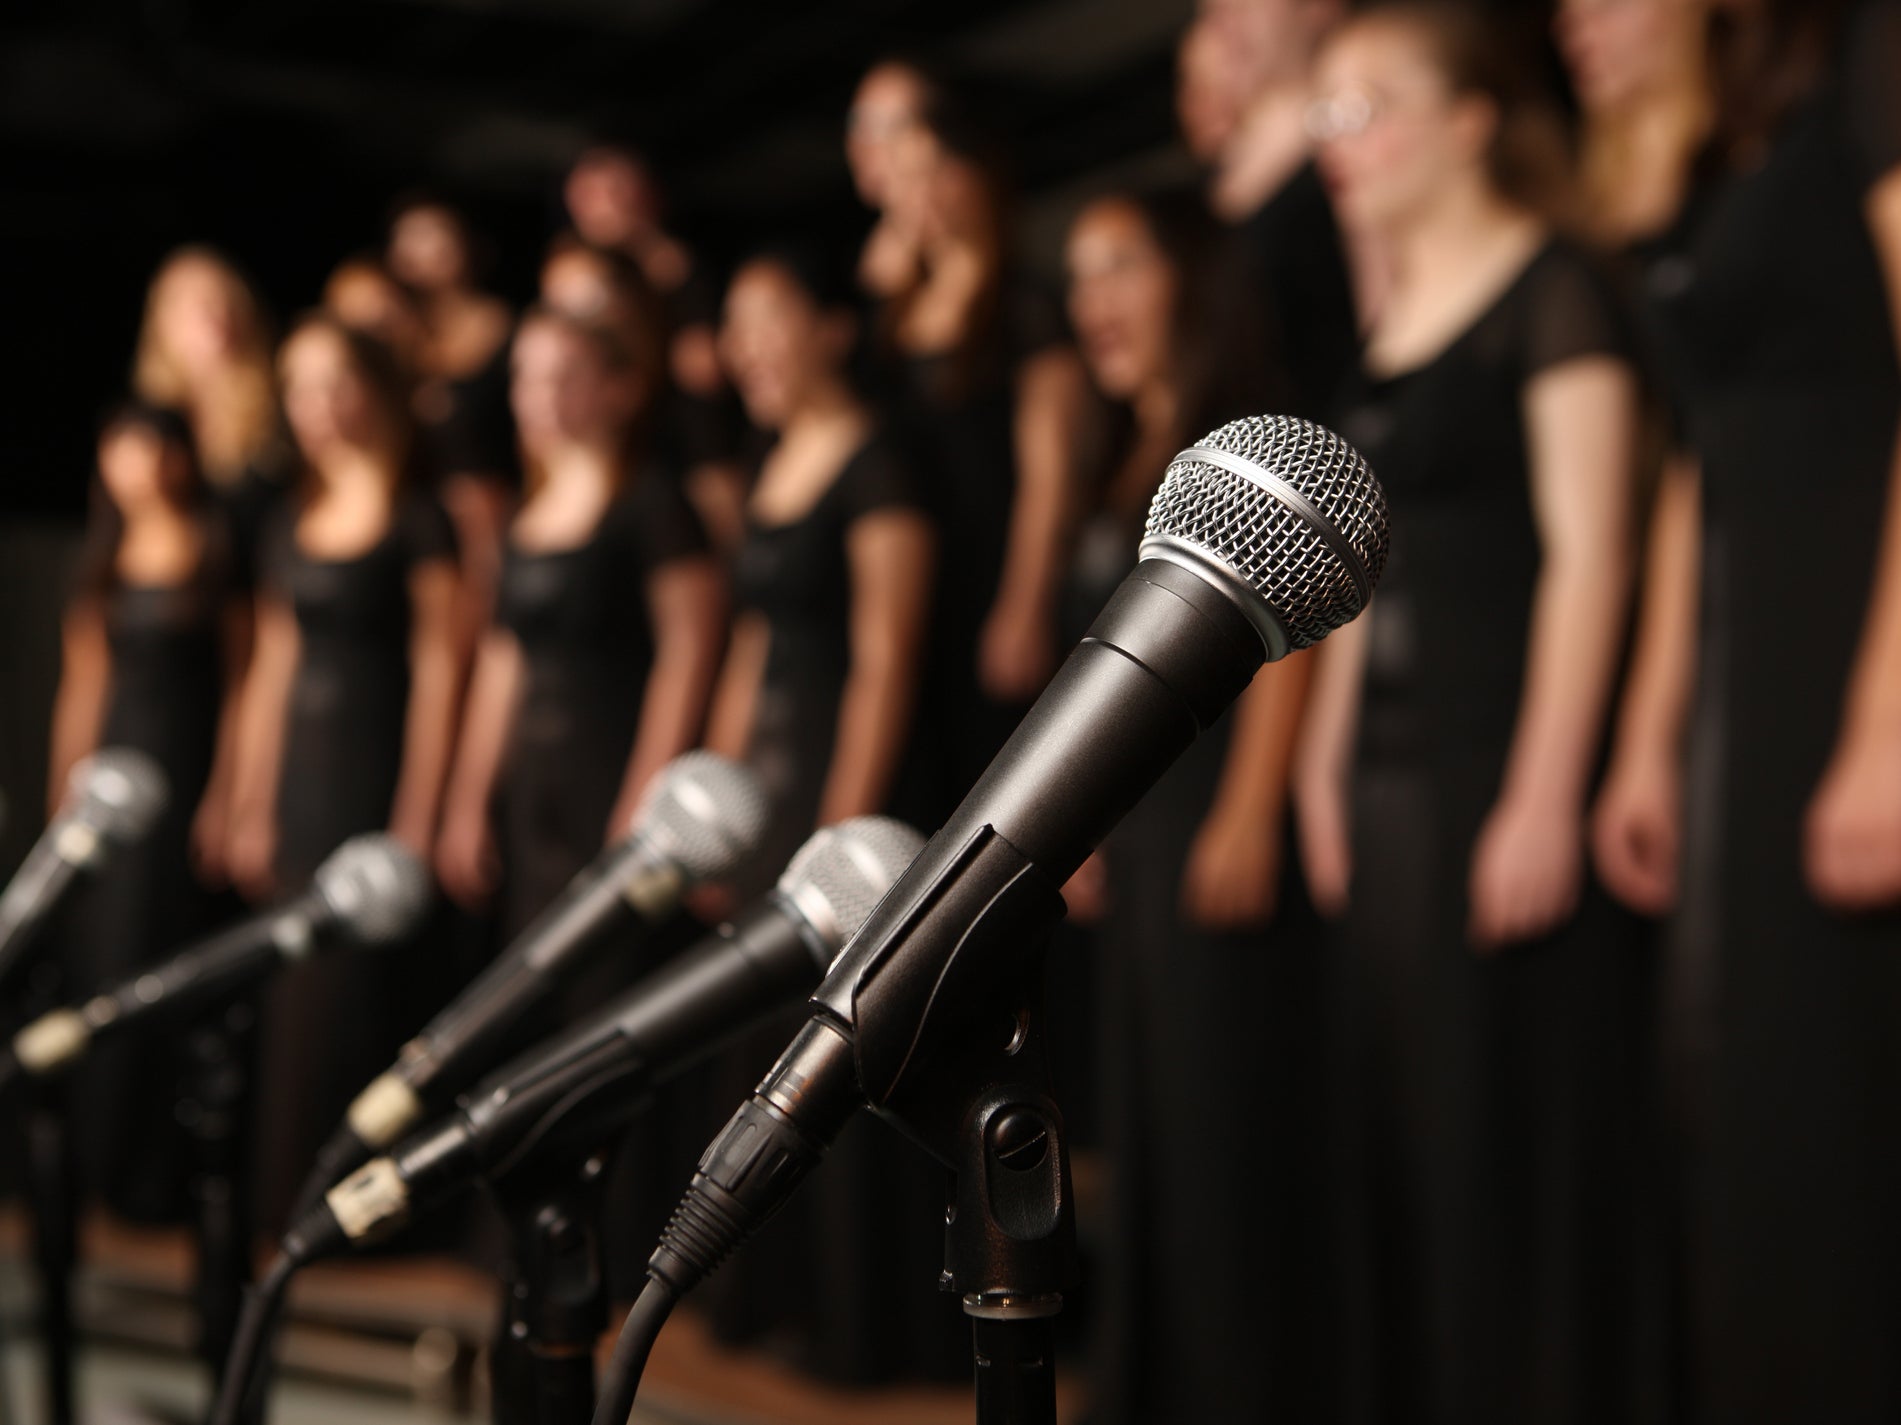 Singing may be no more of an infection risk than speaking, new research indicates